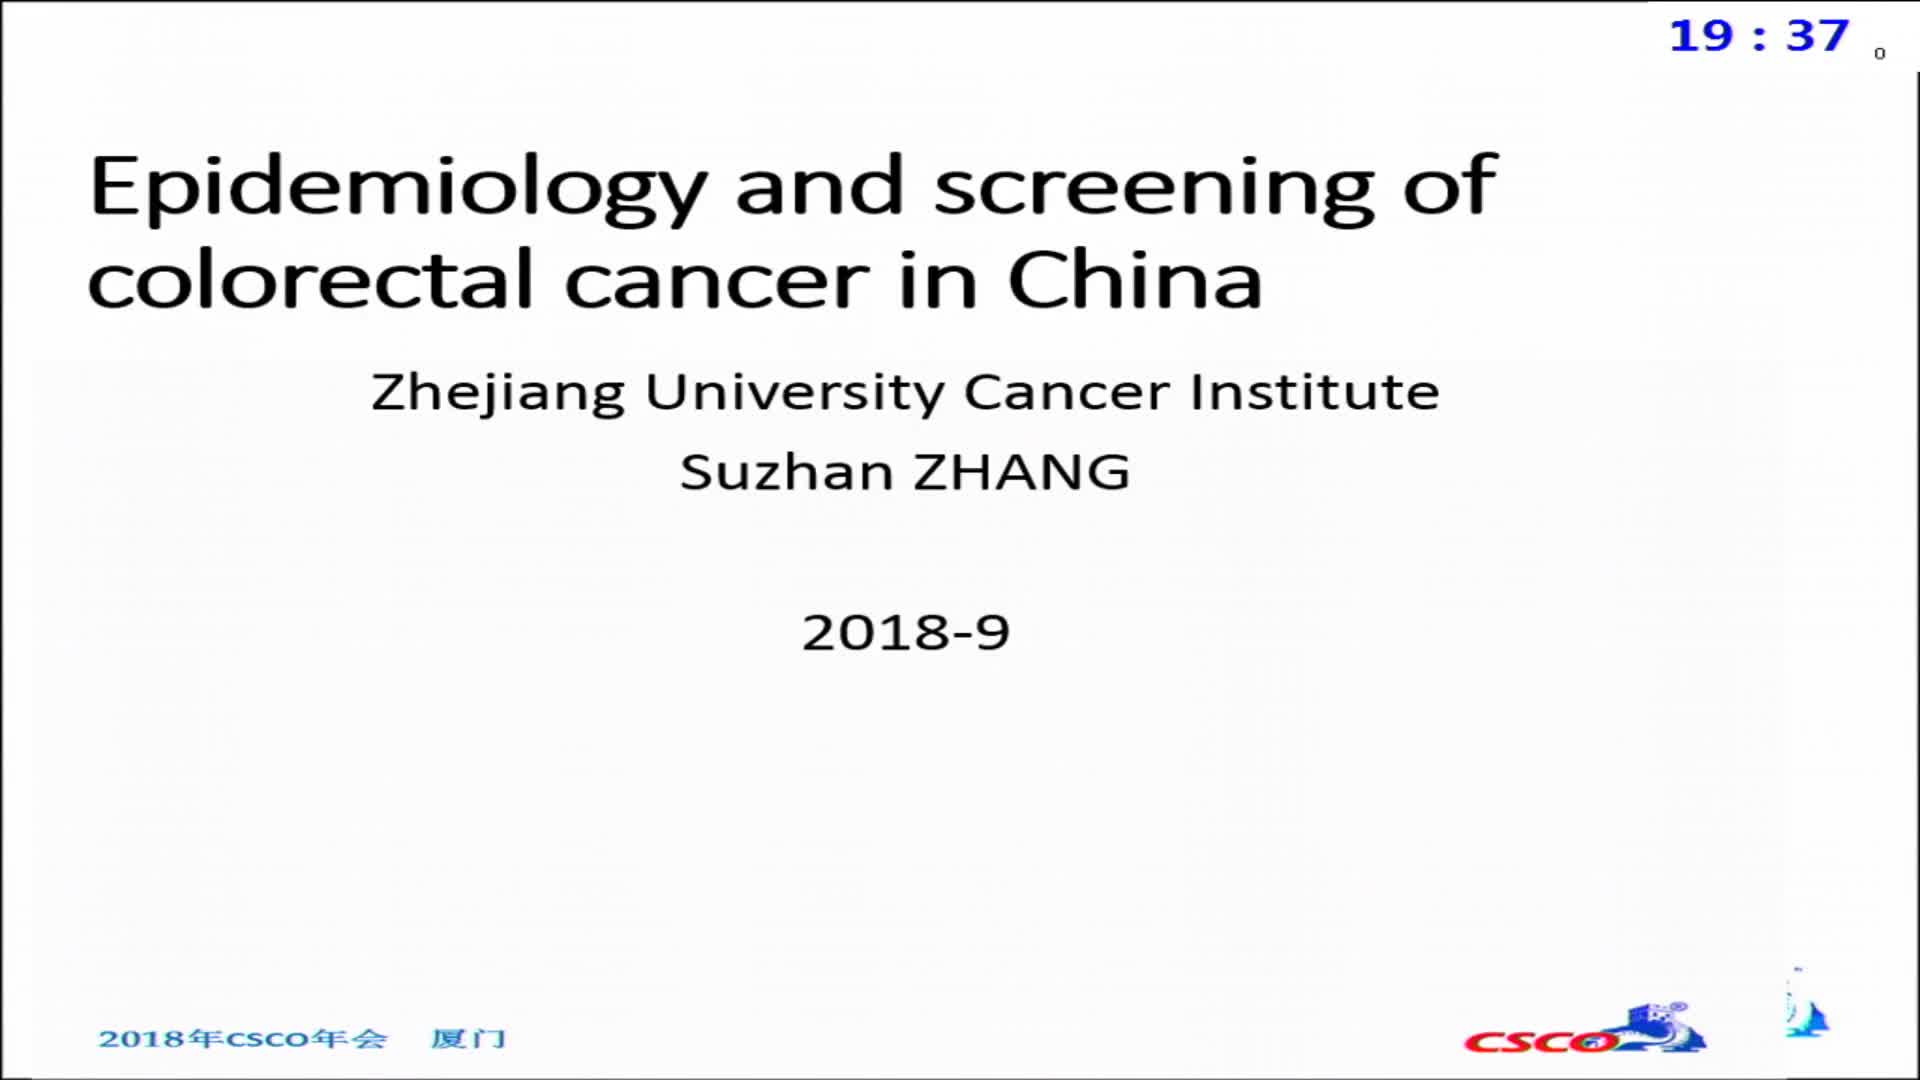 The colorectal cancer screening in China